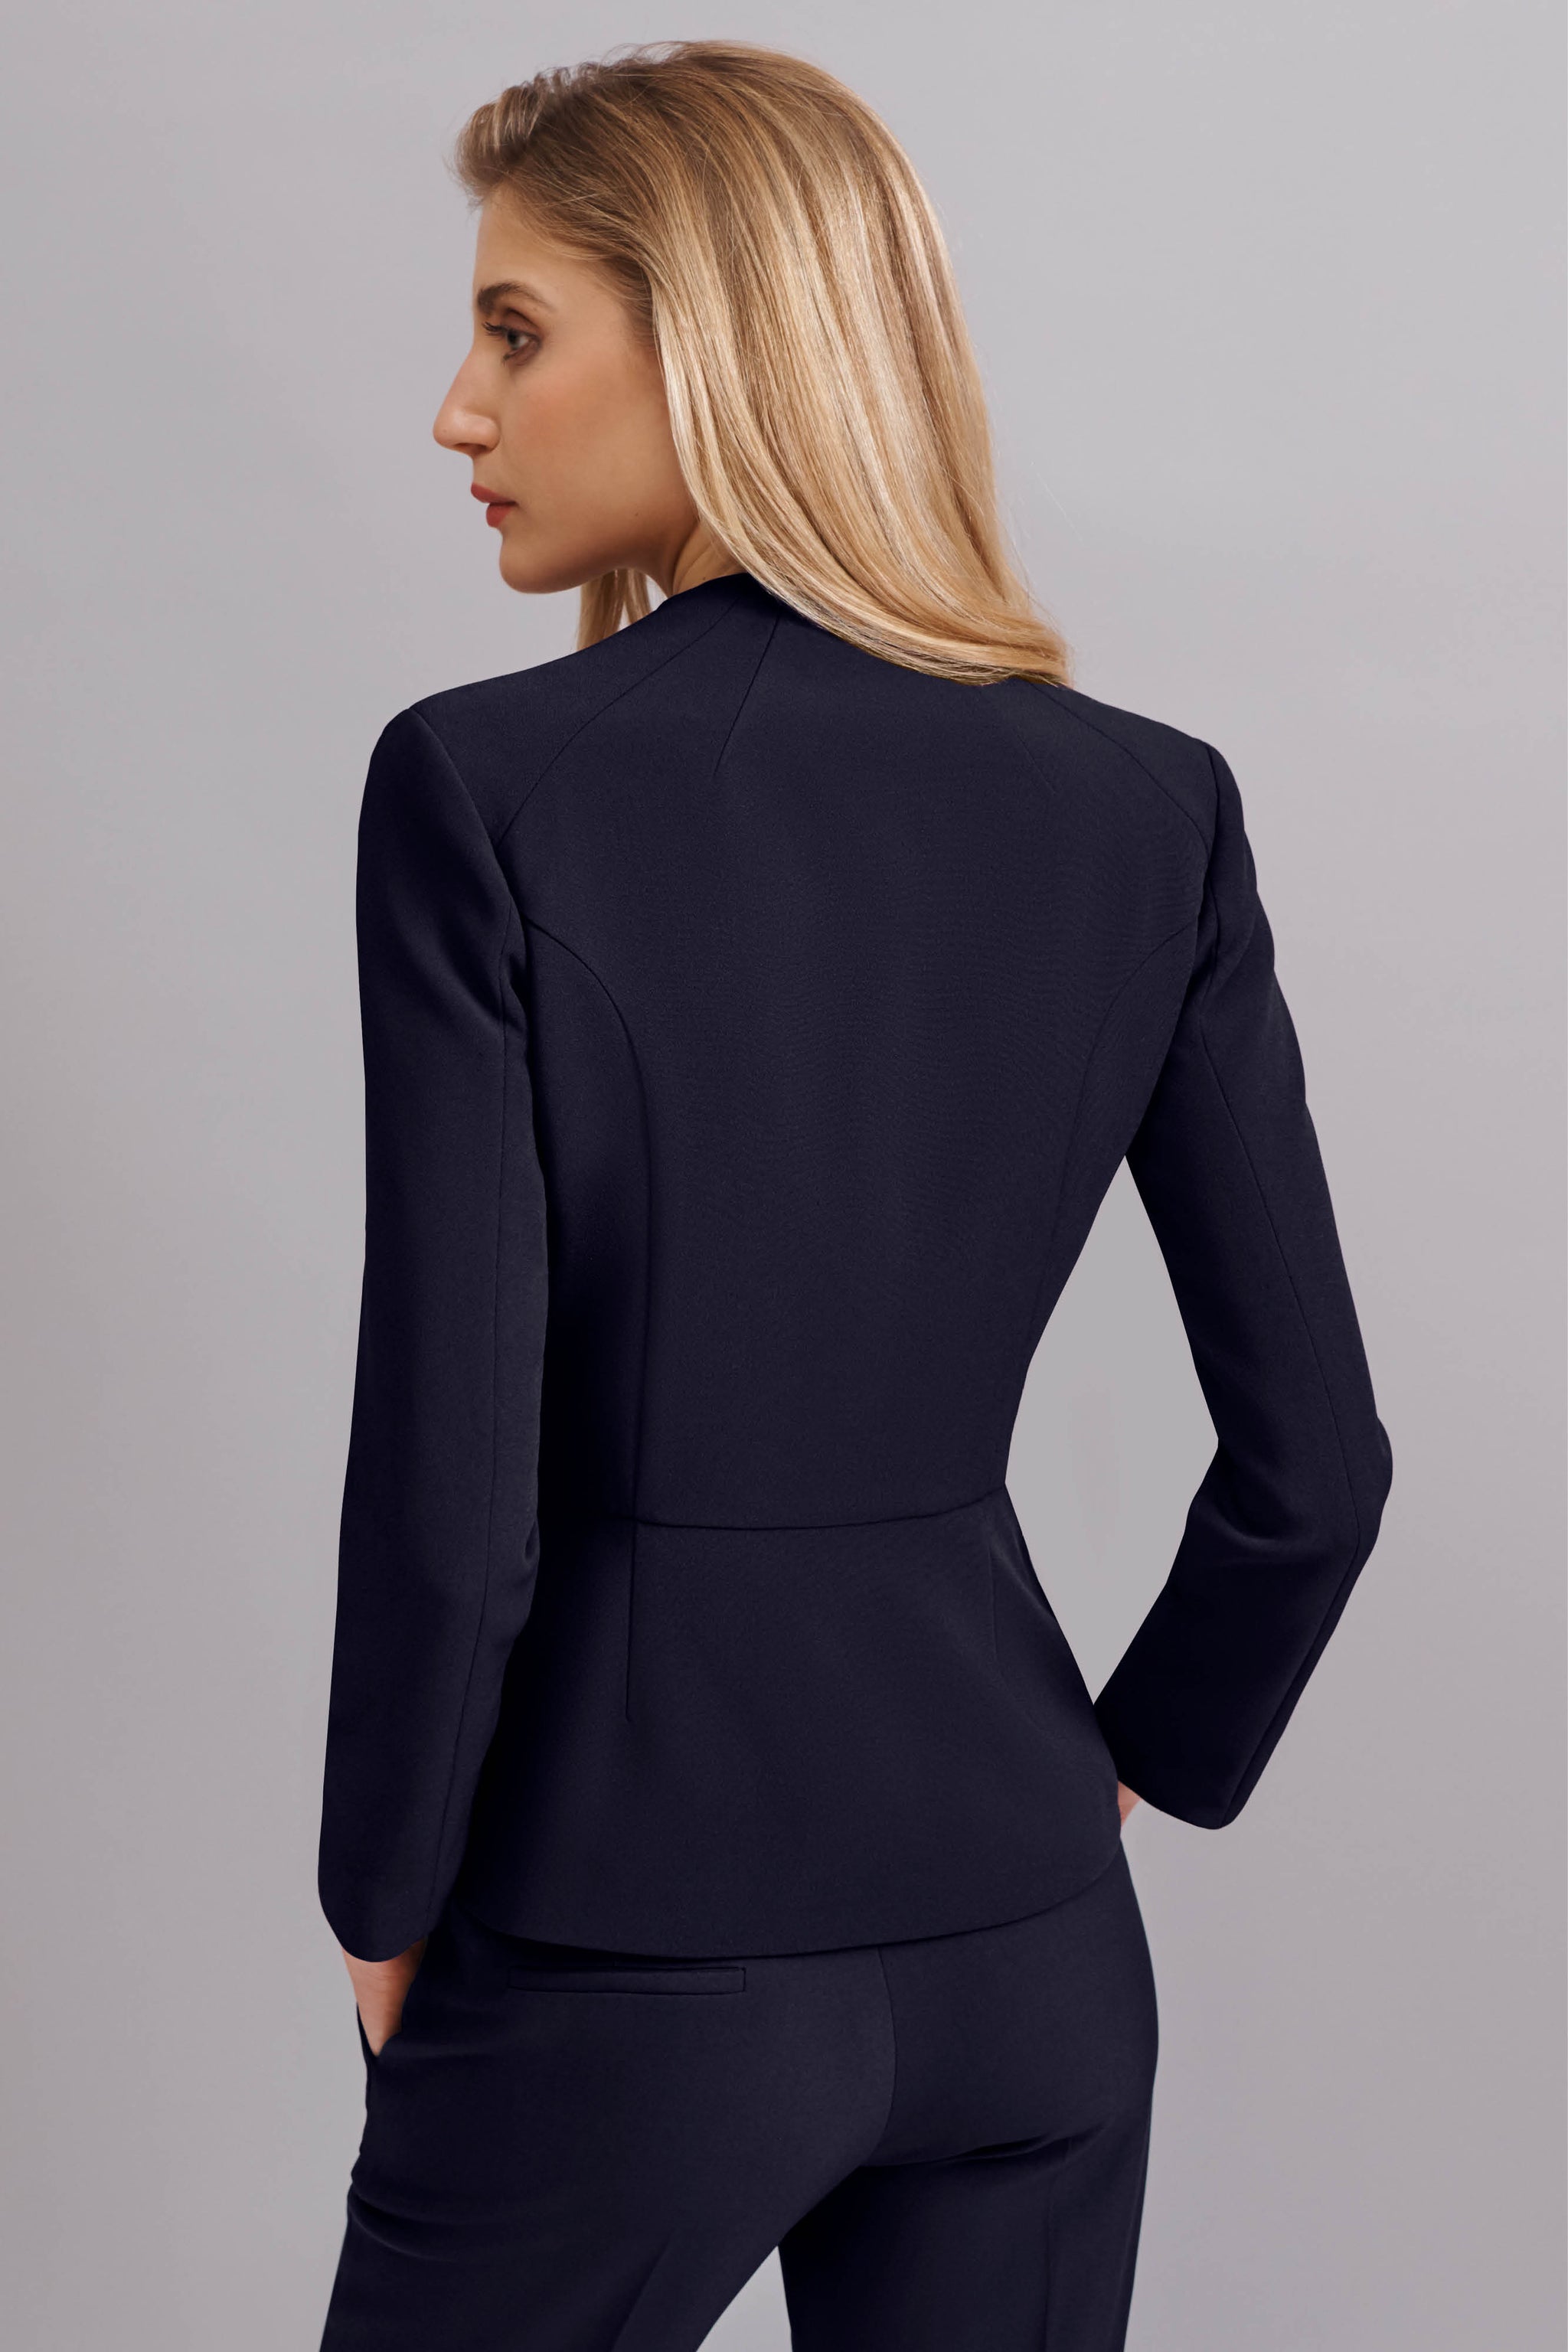 Burghley Navy Performance Tailoring Jacket